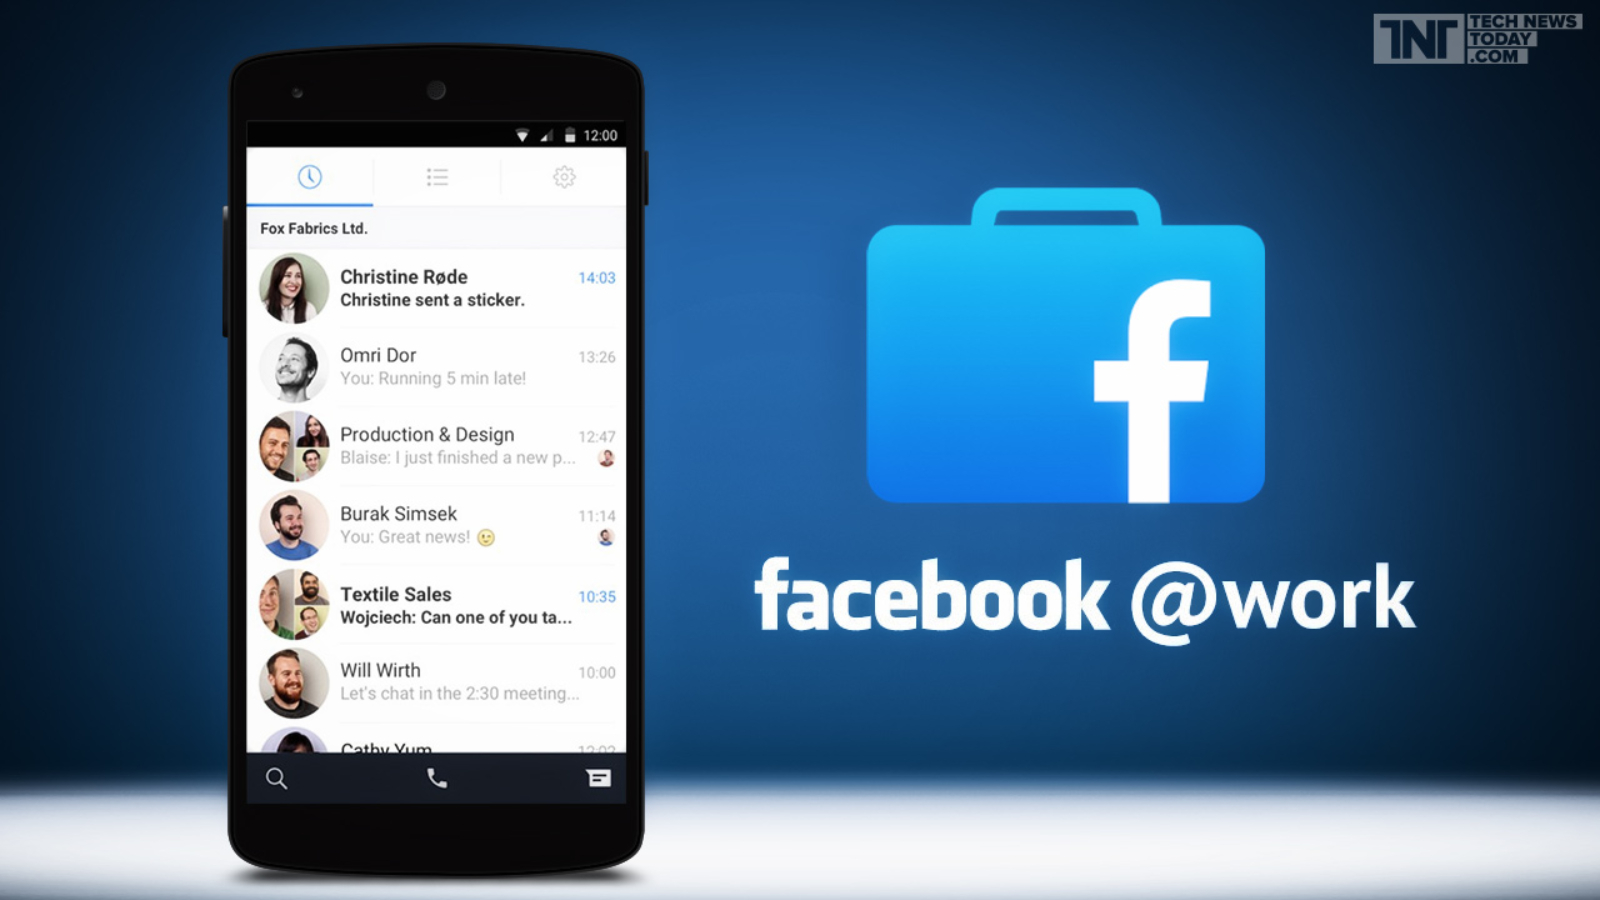 facebook-at-work-introduces-a-chat-app-on-android